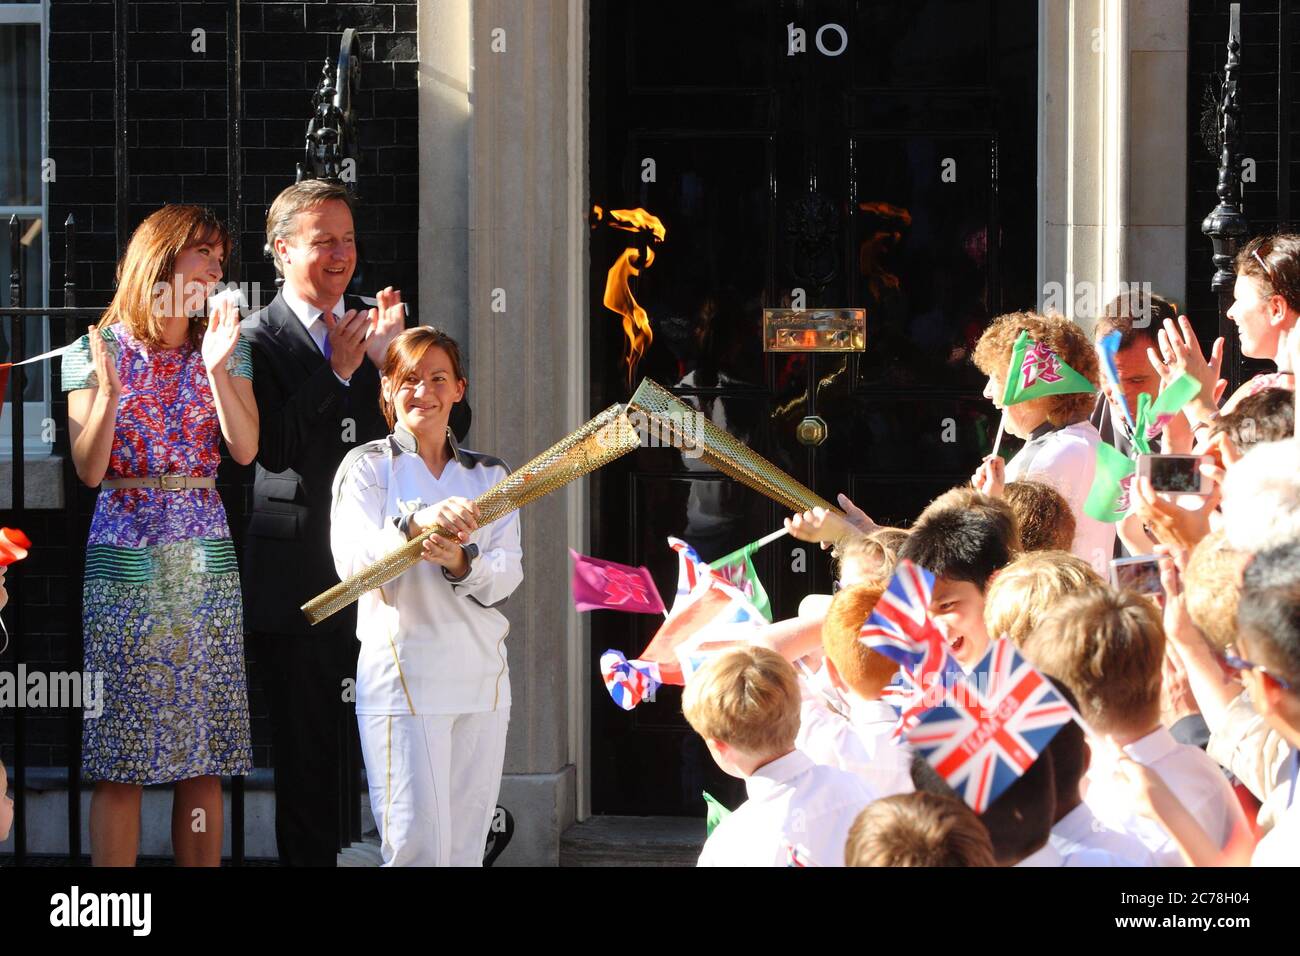 The Olympic Torch reaches Prime Minister David and Samantha Cameron at number 10 Downing Street carried by Ceri Davies who passed on the flame to Florence Rowe. 25 July 2012 --- Image by © Paul Cunningham Stock Photo